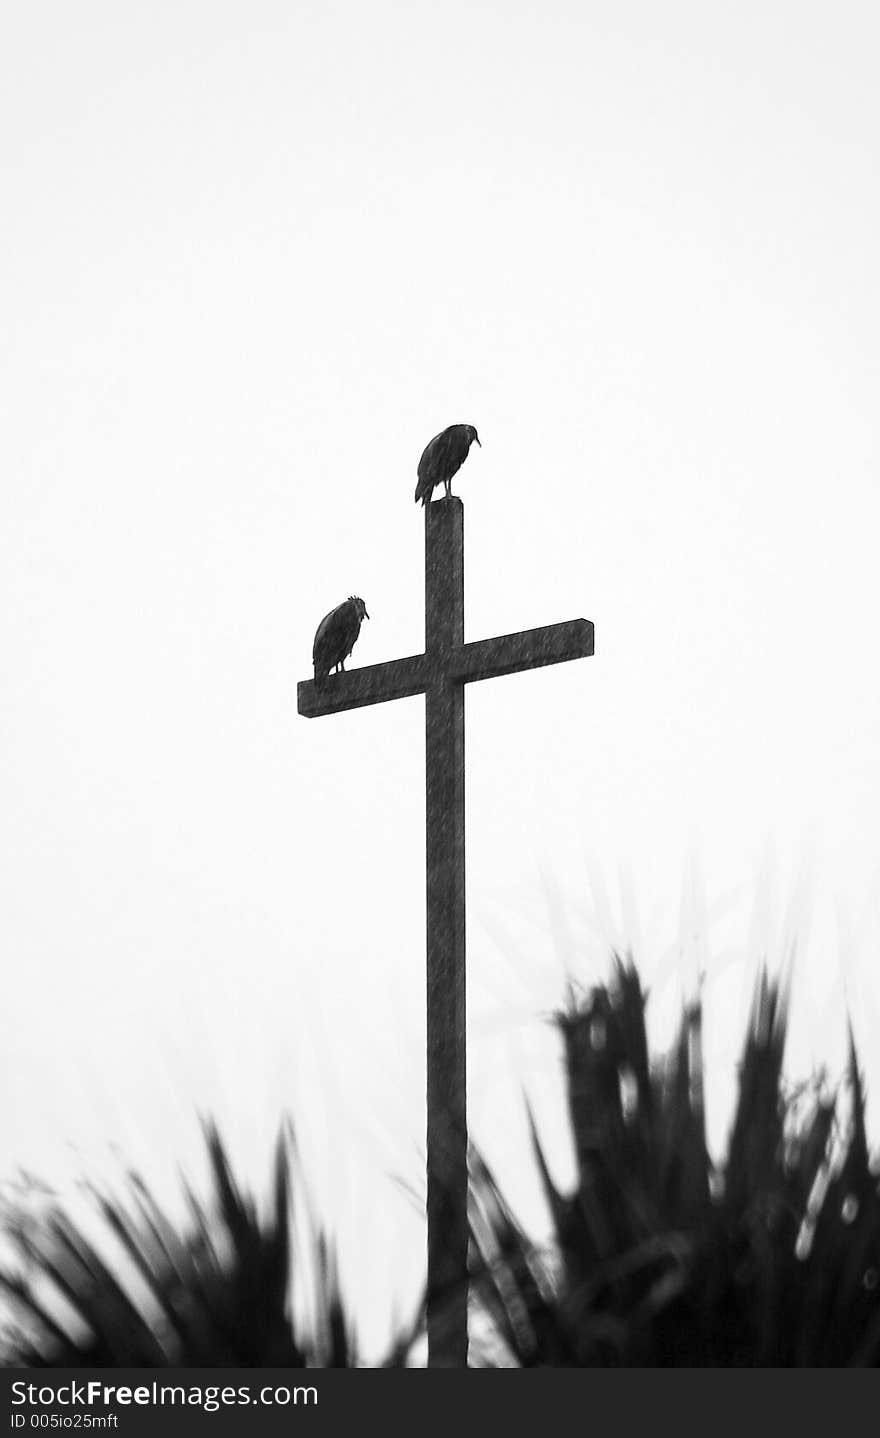 Two vultures perched on  wooden cross during a rain storm. Two vultures perched on  wooden cross during a rain storm.